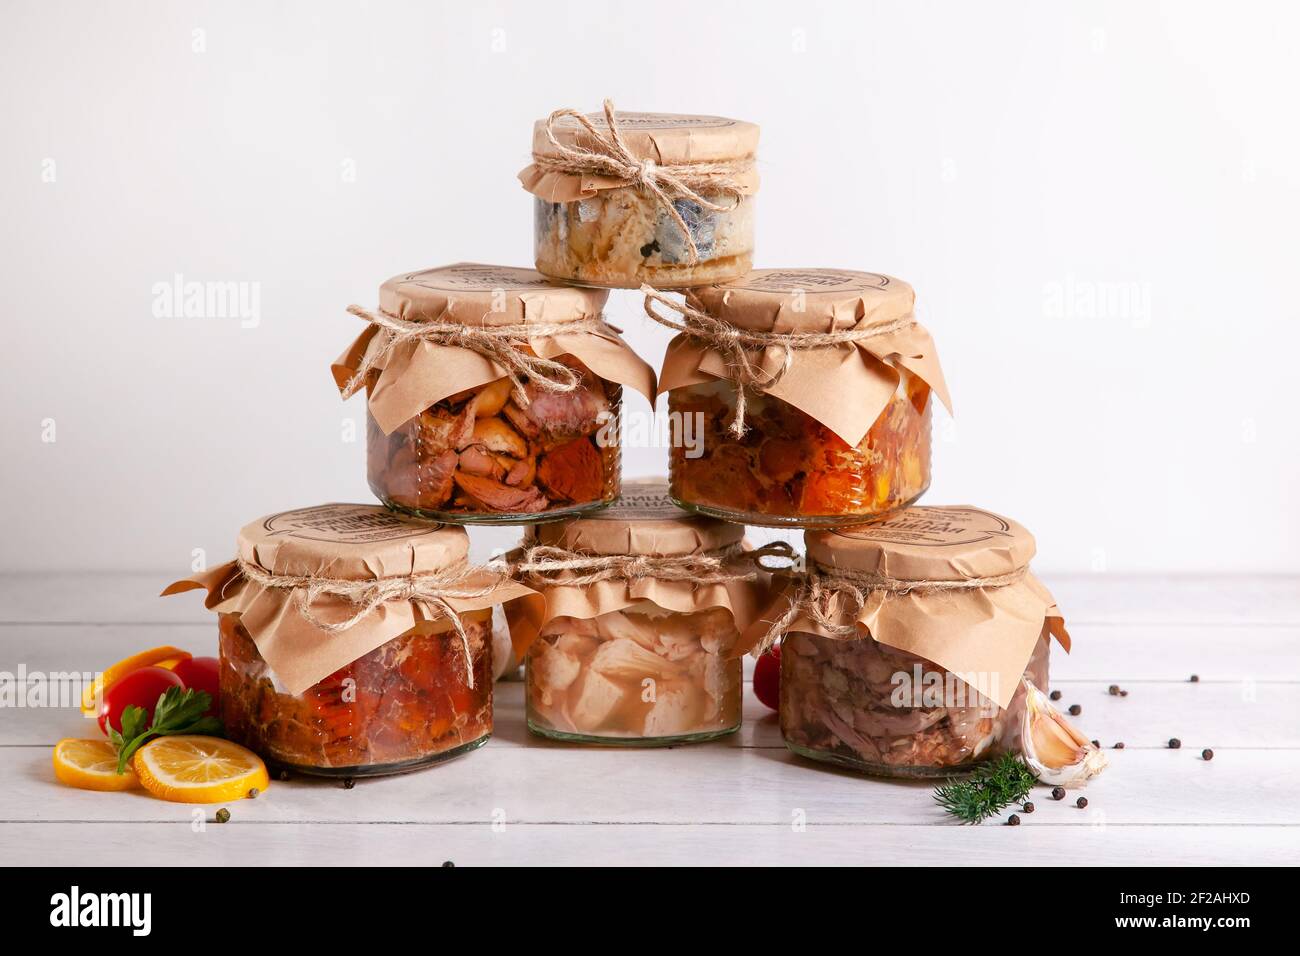 Homemade canned meat from farm poultry-goose, duck, chicken, pork and beef, canned fish from mackerel. A pyramid of glass cans with canned food. Stock Photo